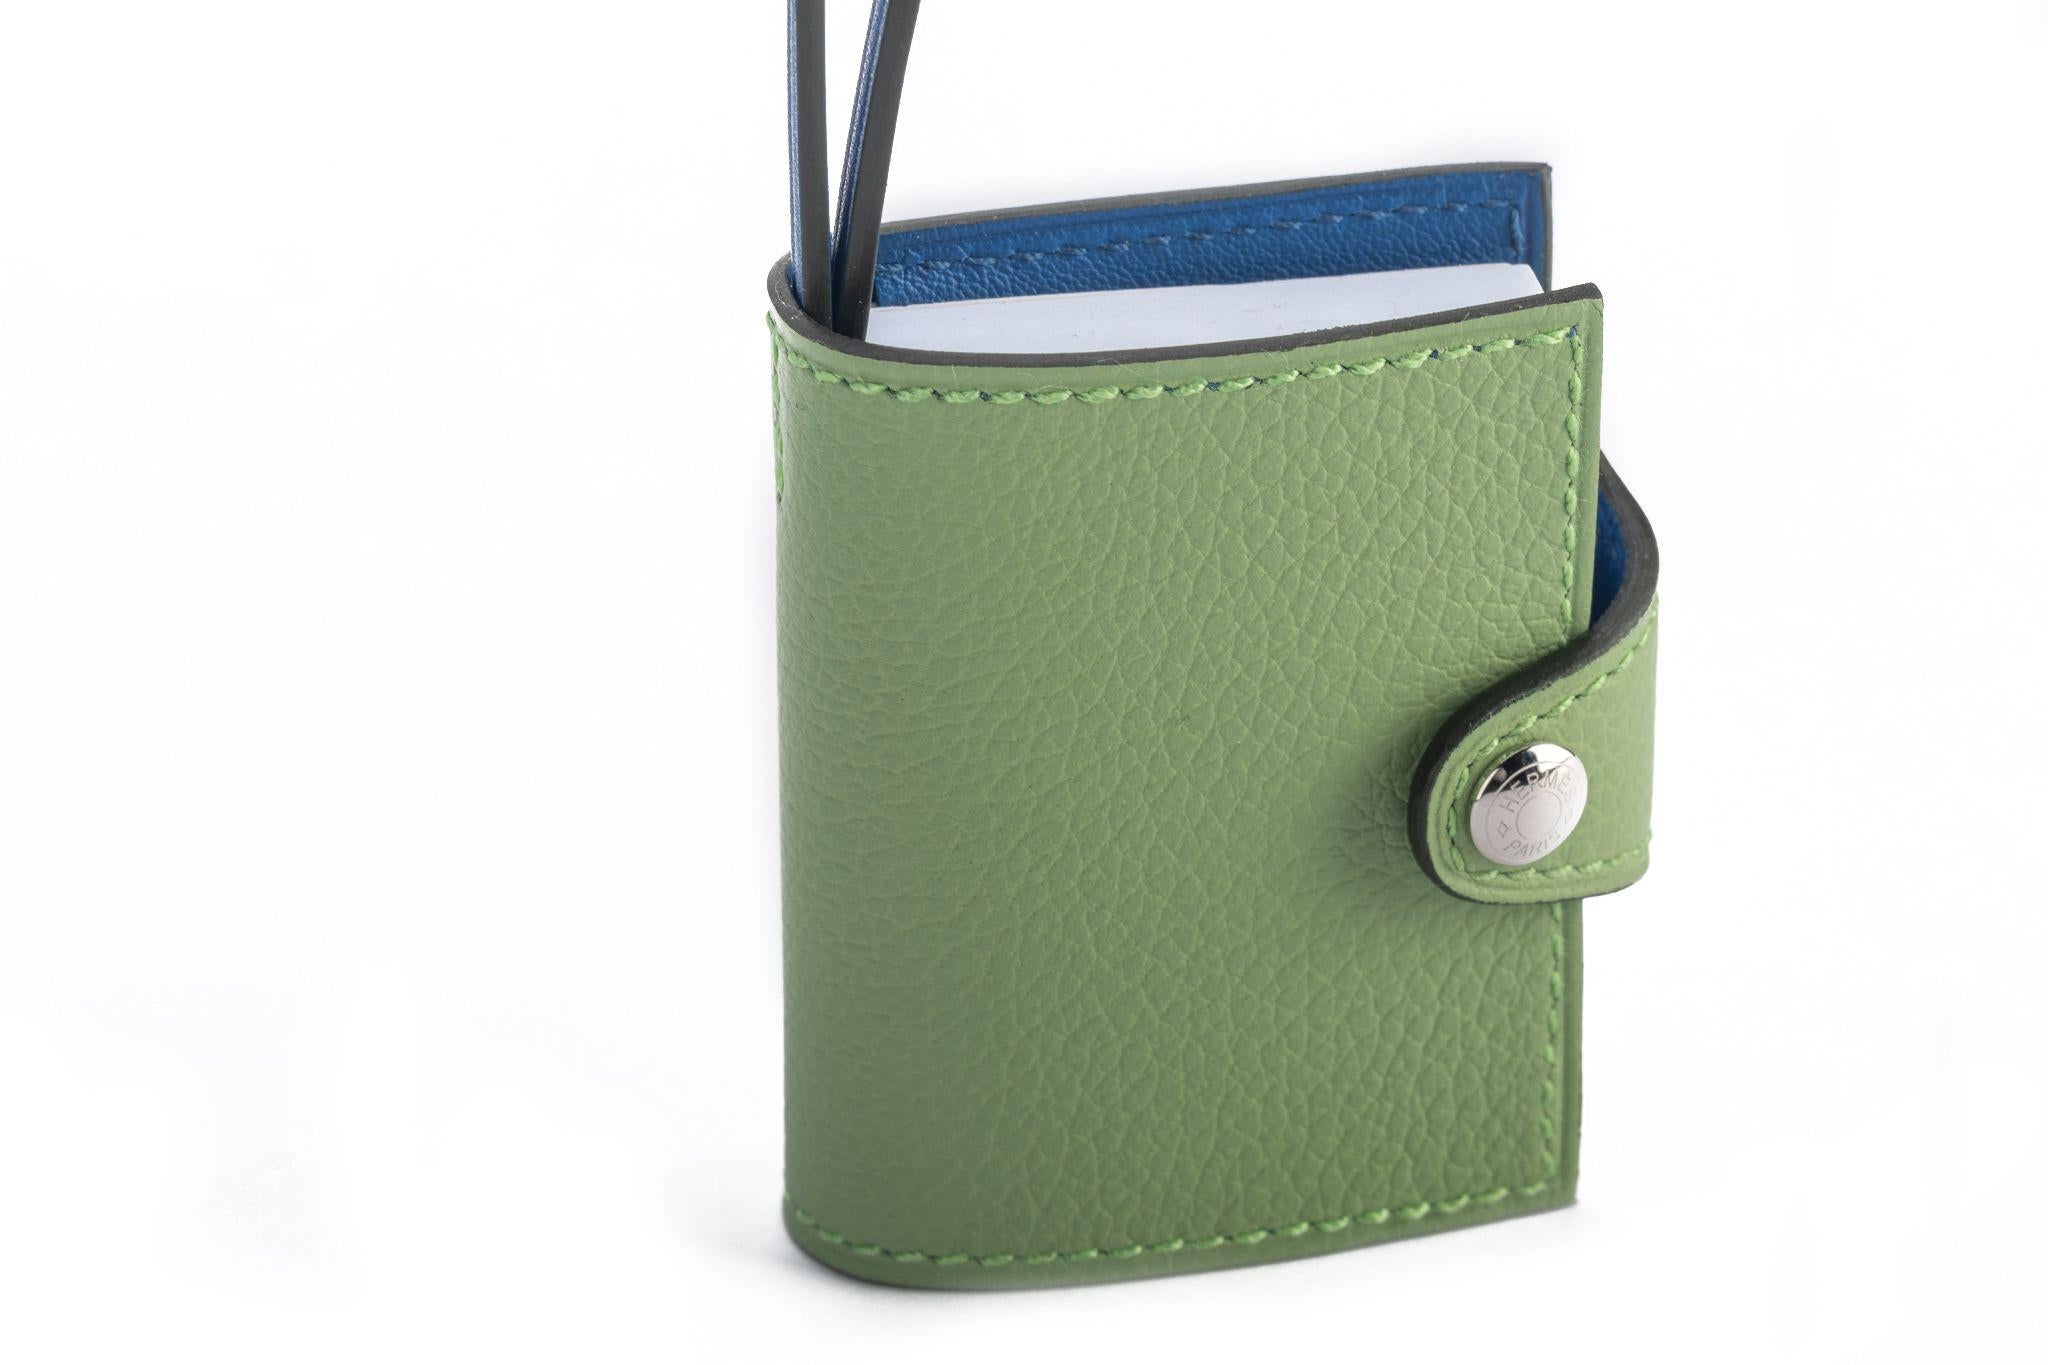 Hermes just released mini notebook bag charm. Verso combination of vert criquet and blue de France. New in box.